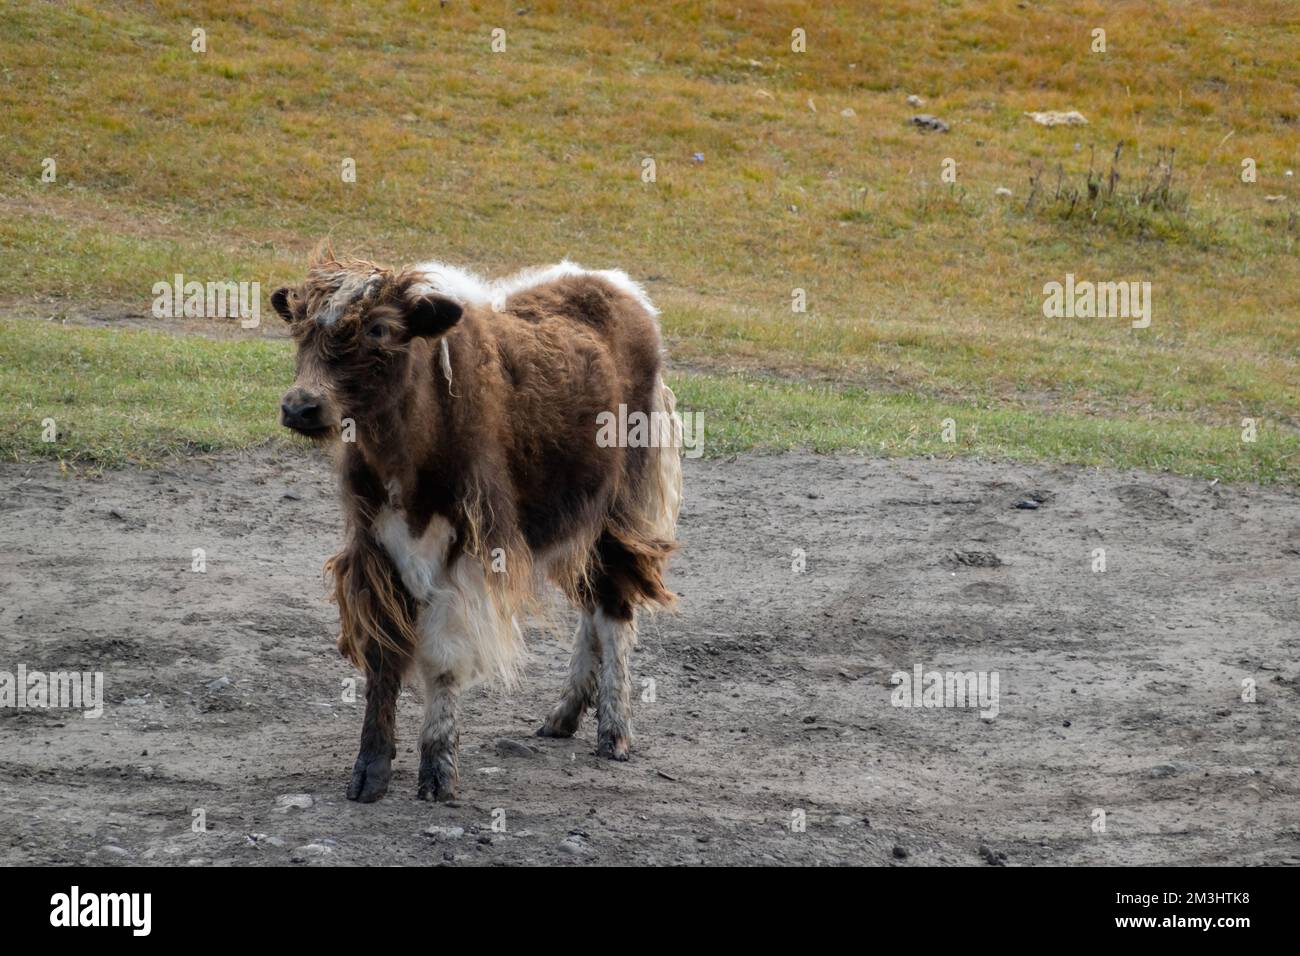 Yak heard standing in a field in rural Mongolia. Longhair buffalo in a countryside on a sunny day. Stock Photo